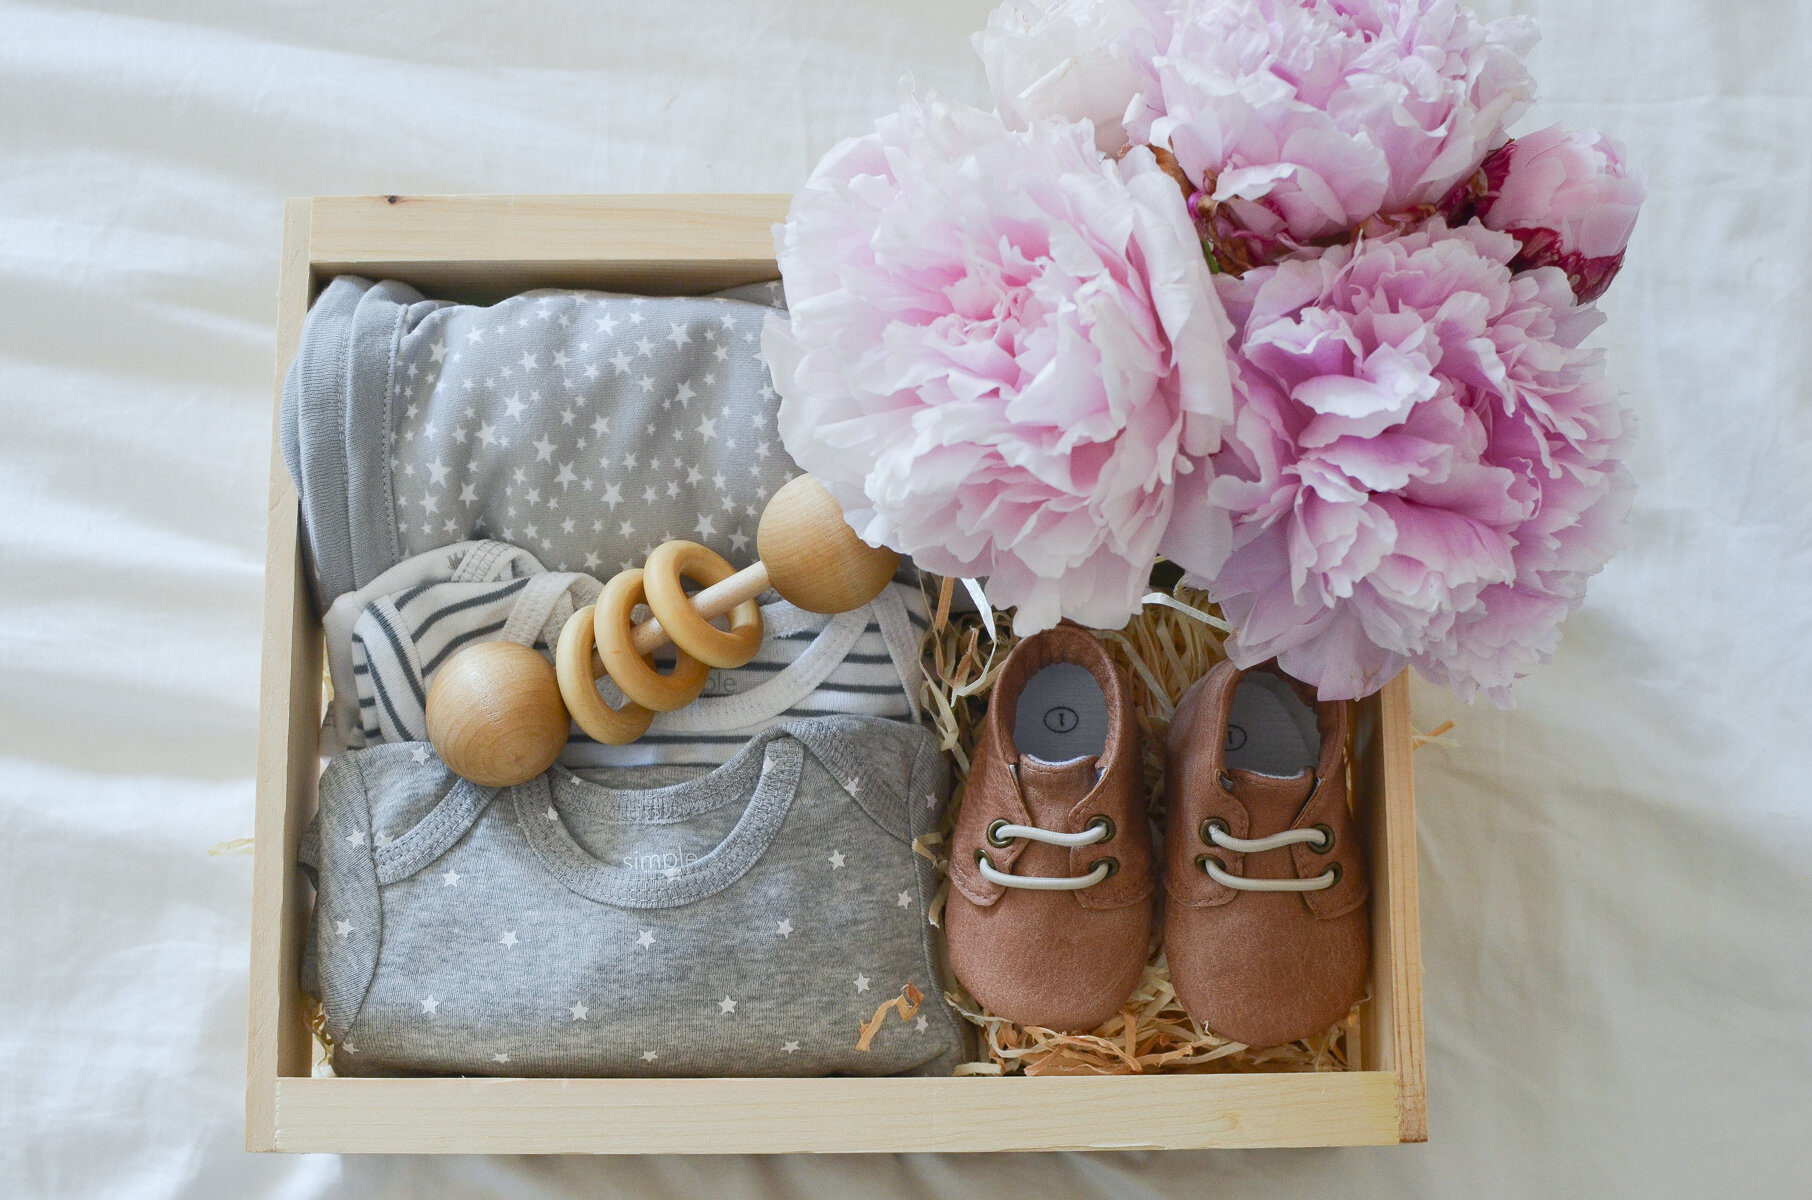 10 Free Baby Shower Gifts Every Mom Wants · Pint-sized Treasures